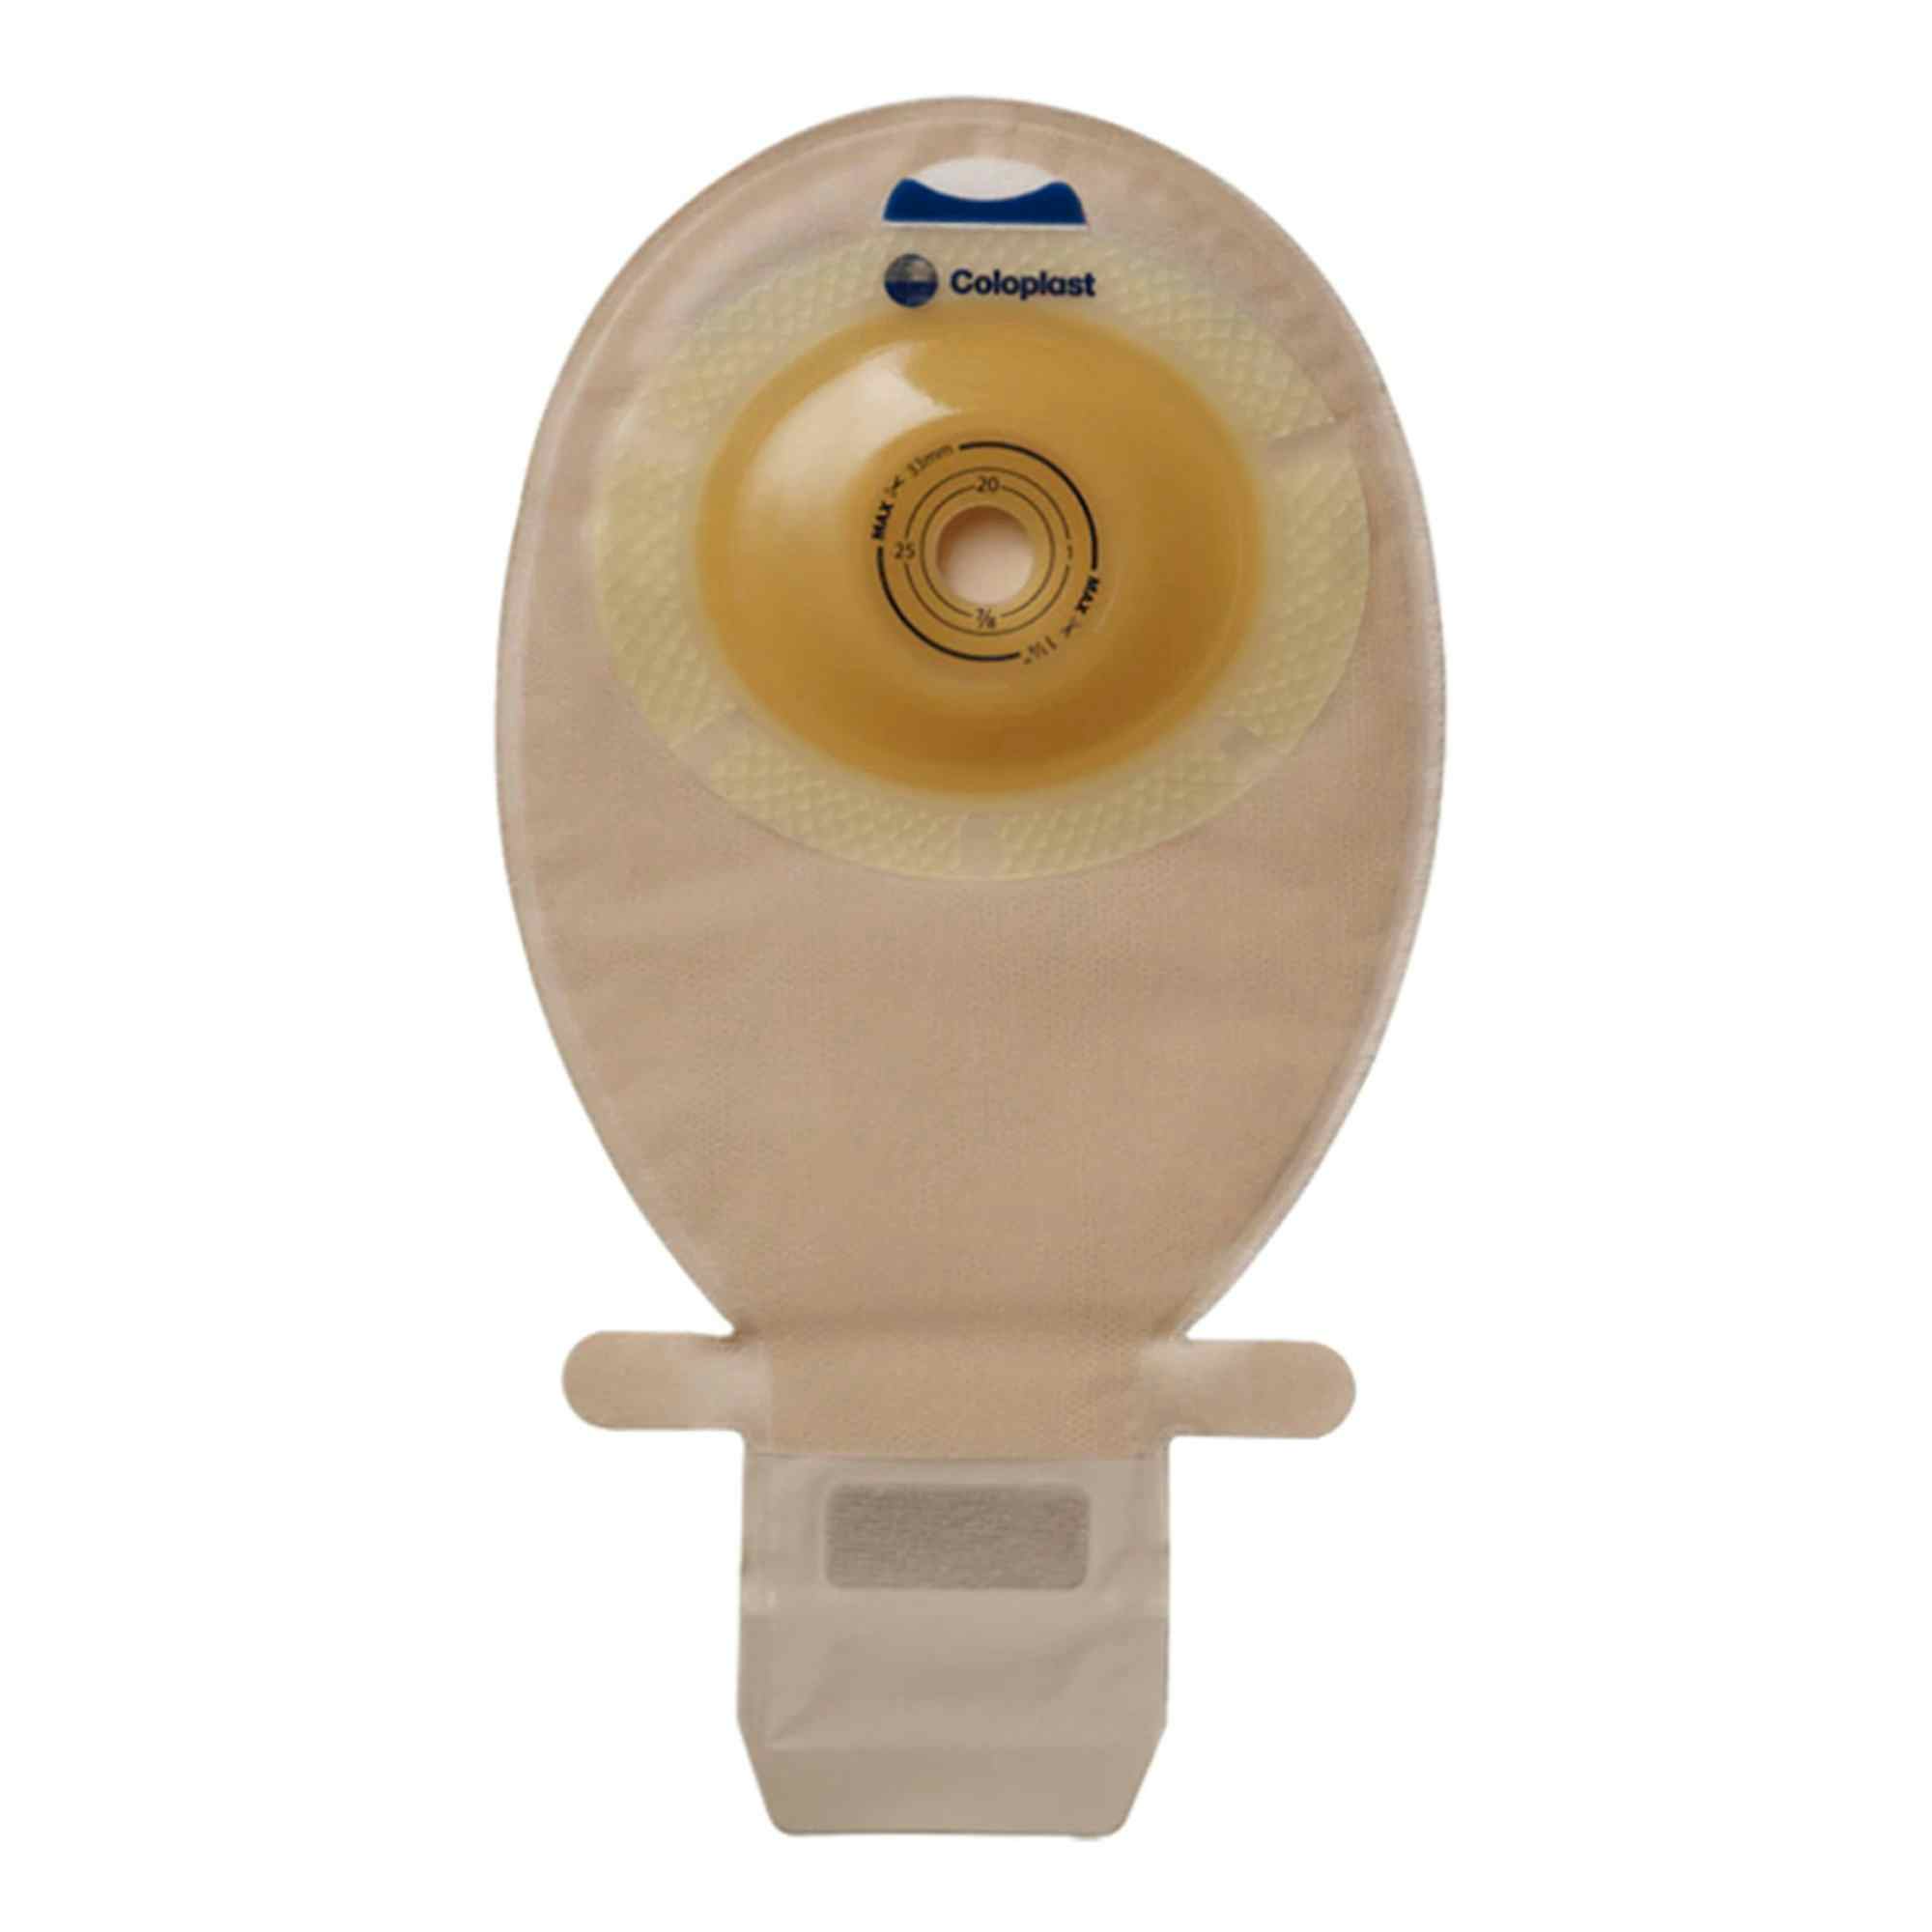 SenSura EasiClose One-Piece System Ostomy Pouch, Convex Light, 1" Stoma, 15623, Box of 10